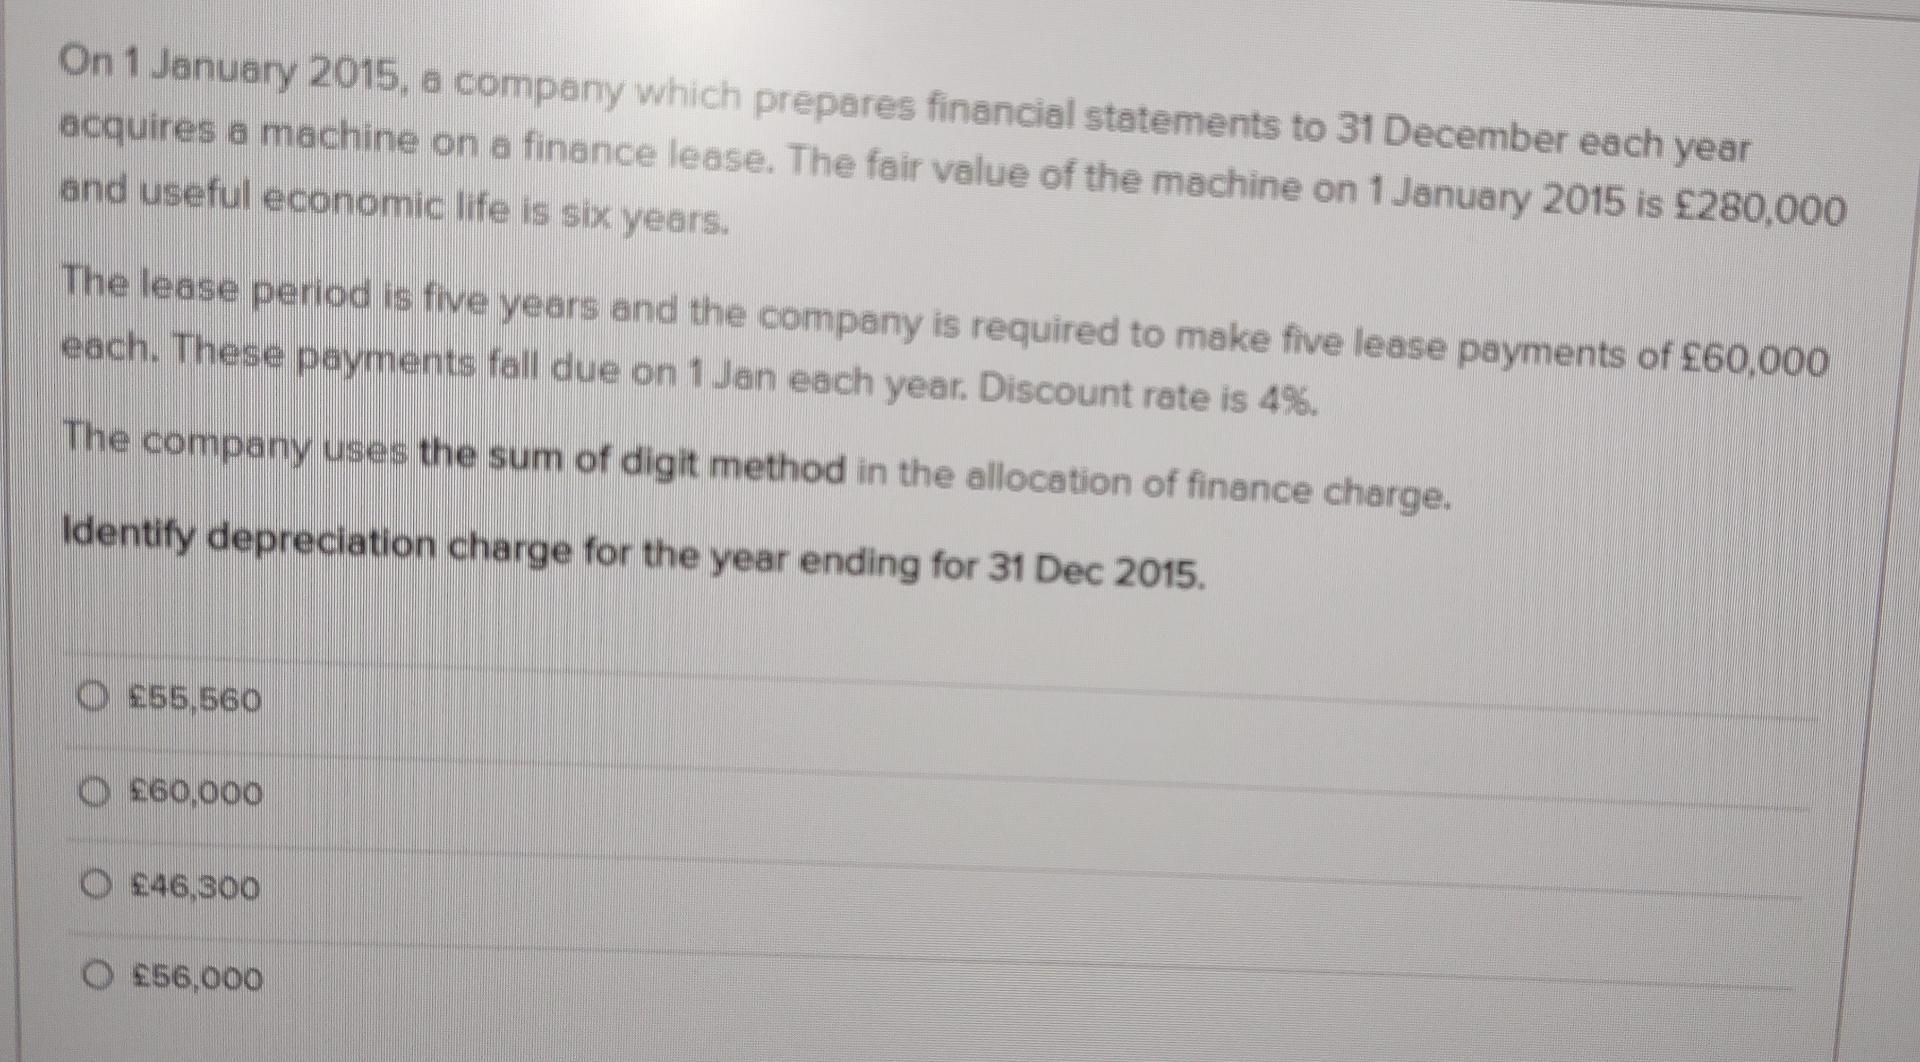 On 1 January 2015, a company which prepares financial statements to 31 December each yearacquires a machine on a finance lea